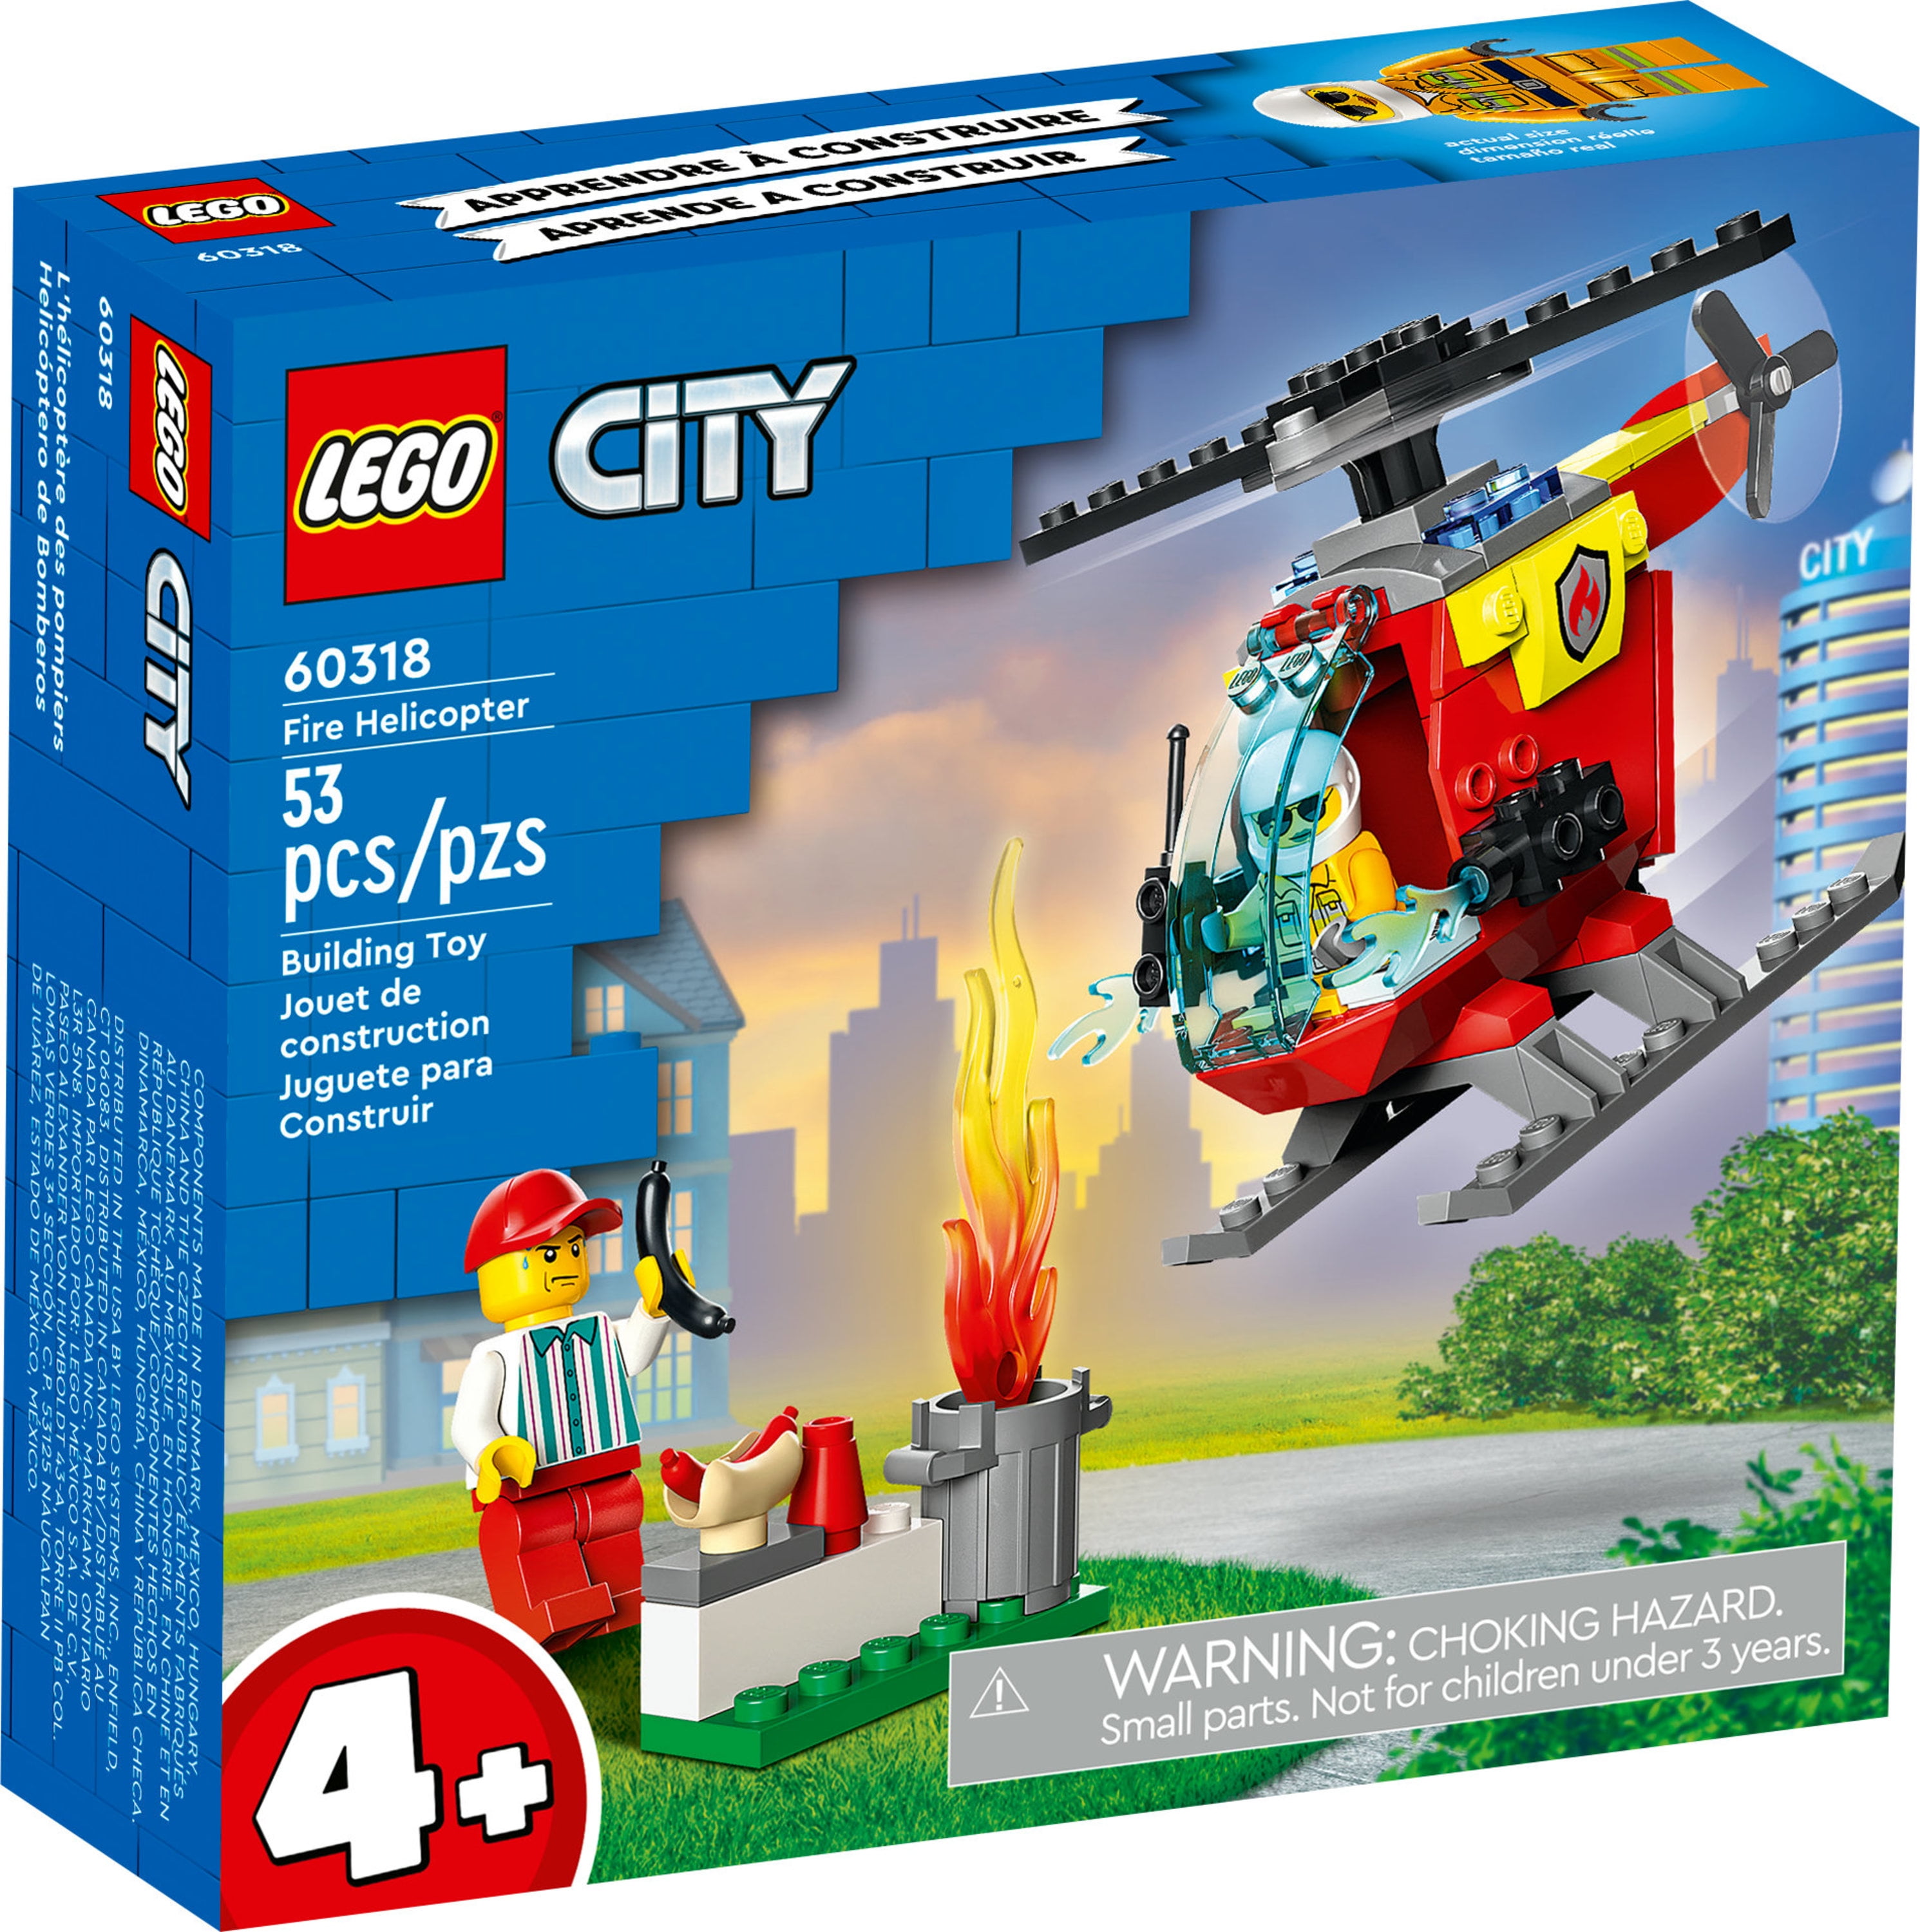  Fire Rescue Helicopter : Toys & Games